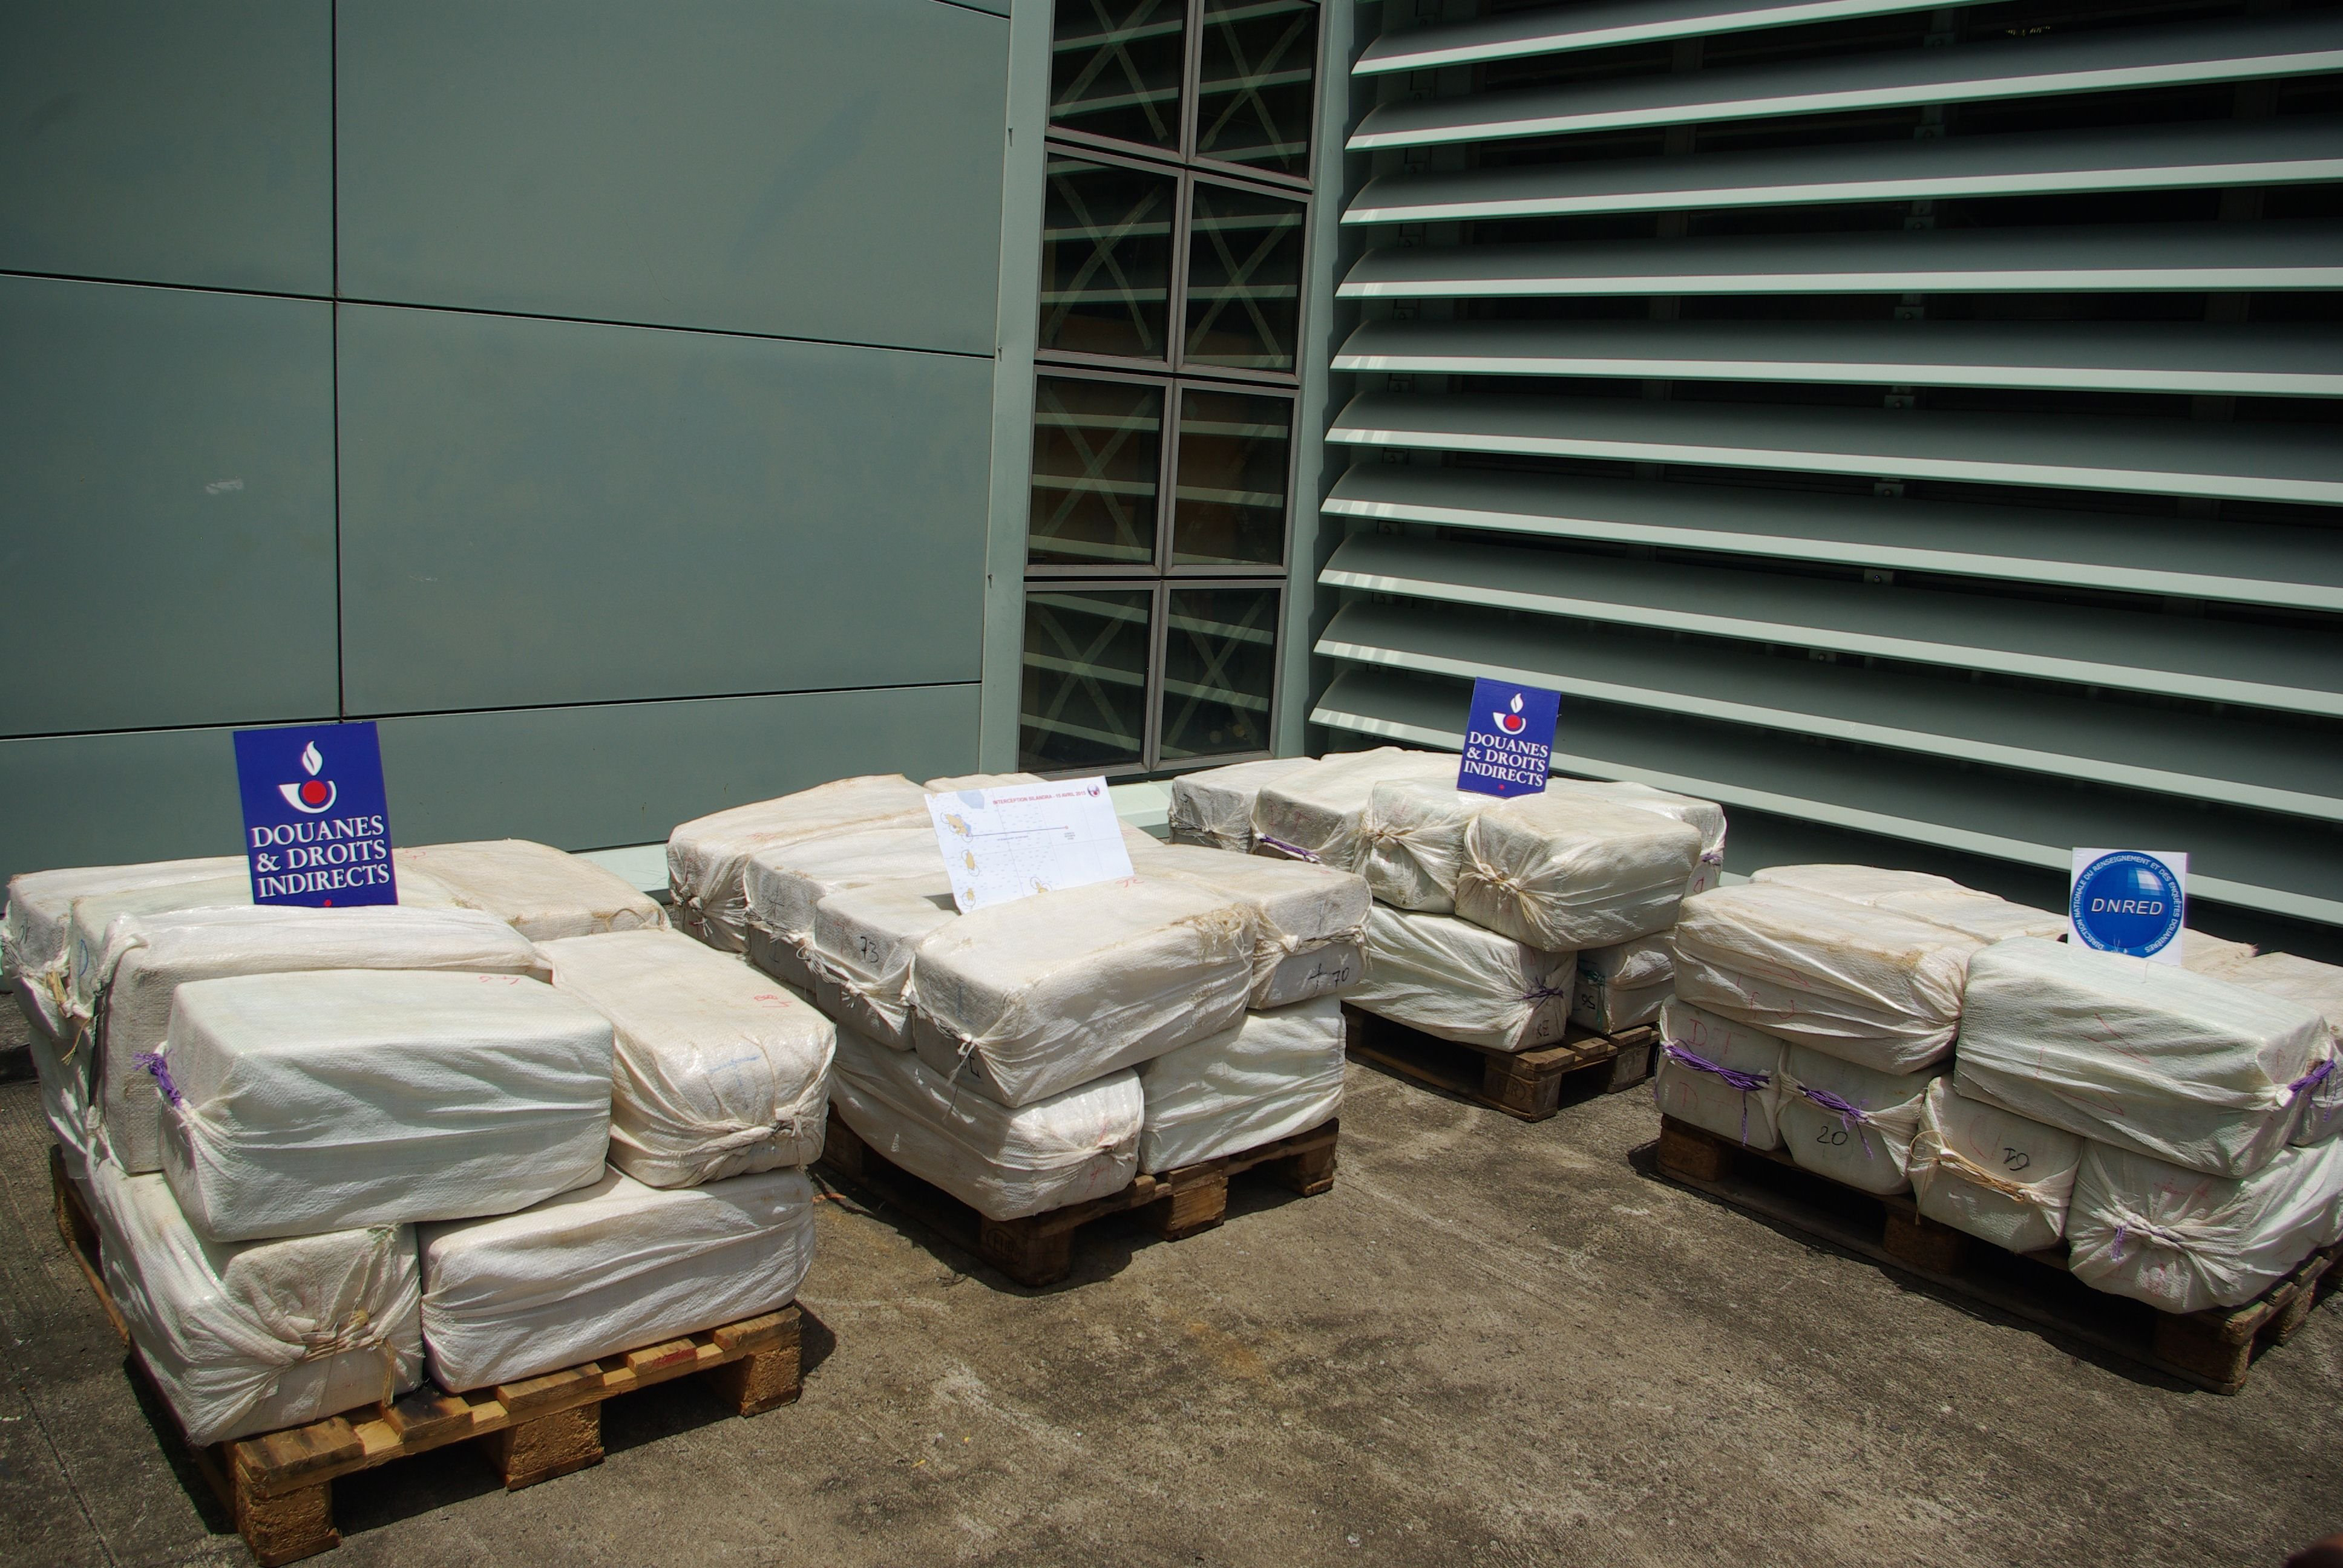 This file photo released on April 18, 2015 by French customs in Fort Saint-Louis military base in Fort-de-France, on the French Caribbean island of Martinique shows packs of cocaine stored after they were seized on April 15, 2015 on a sailboat off the French Caribbean island of Martinique. (Douanes Francaises—AFP/Getty Images)